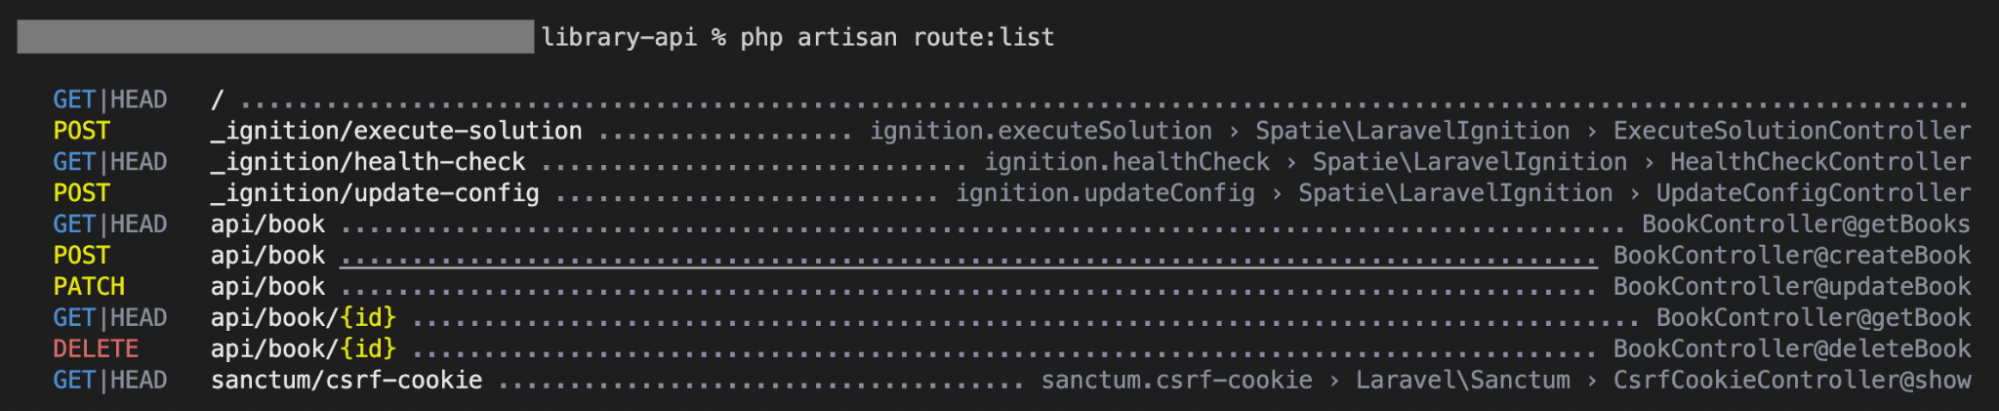 The terminal displays the "php artisan route: